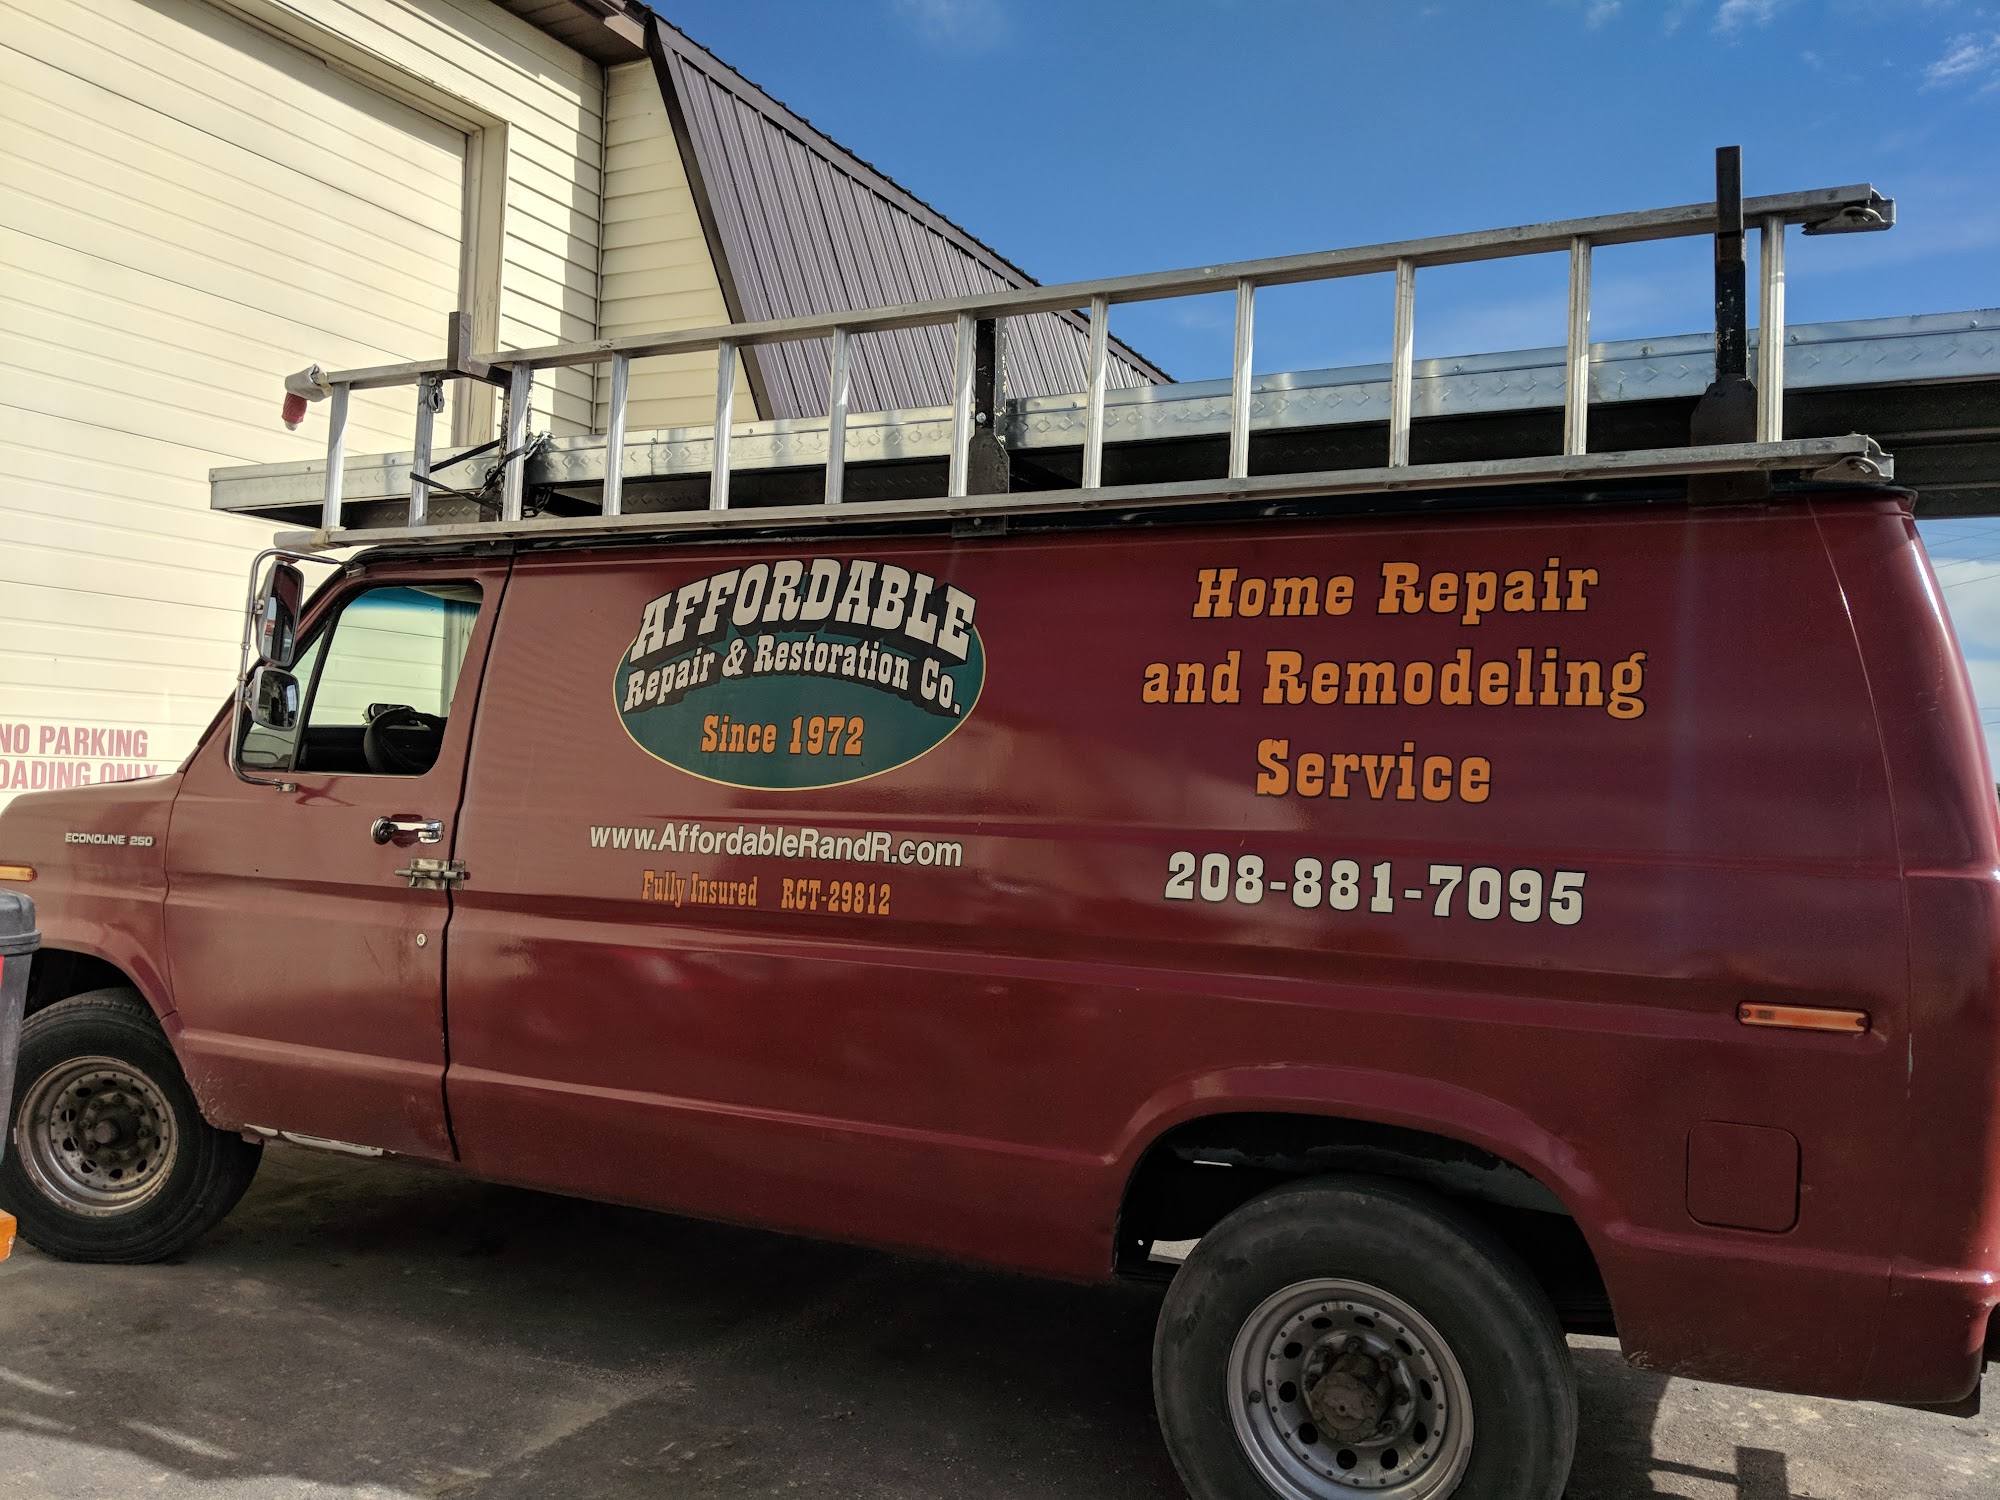 Affordable Repair and Restoration Company